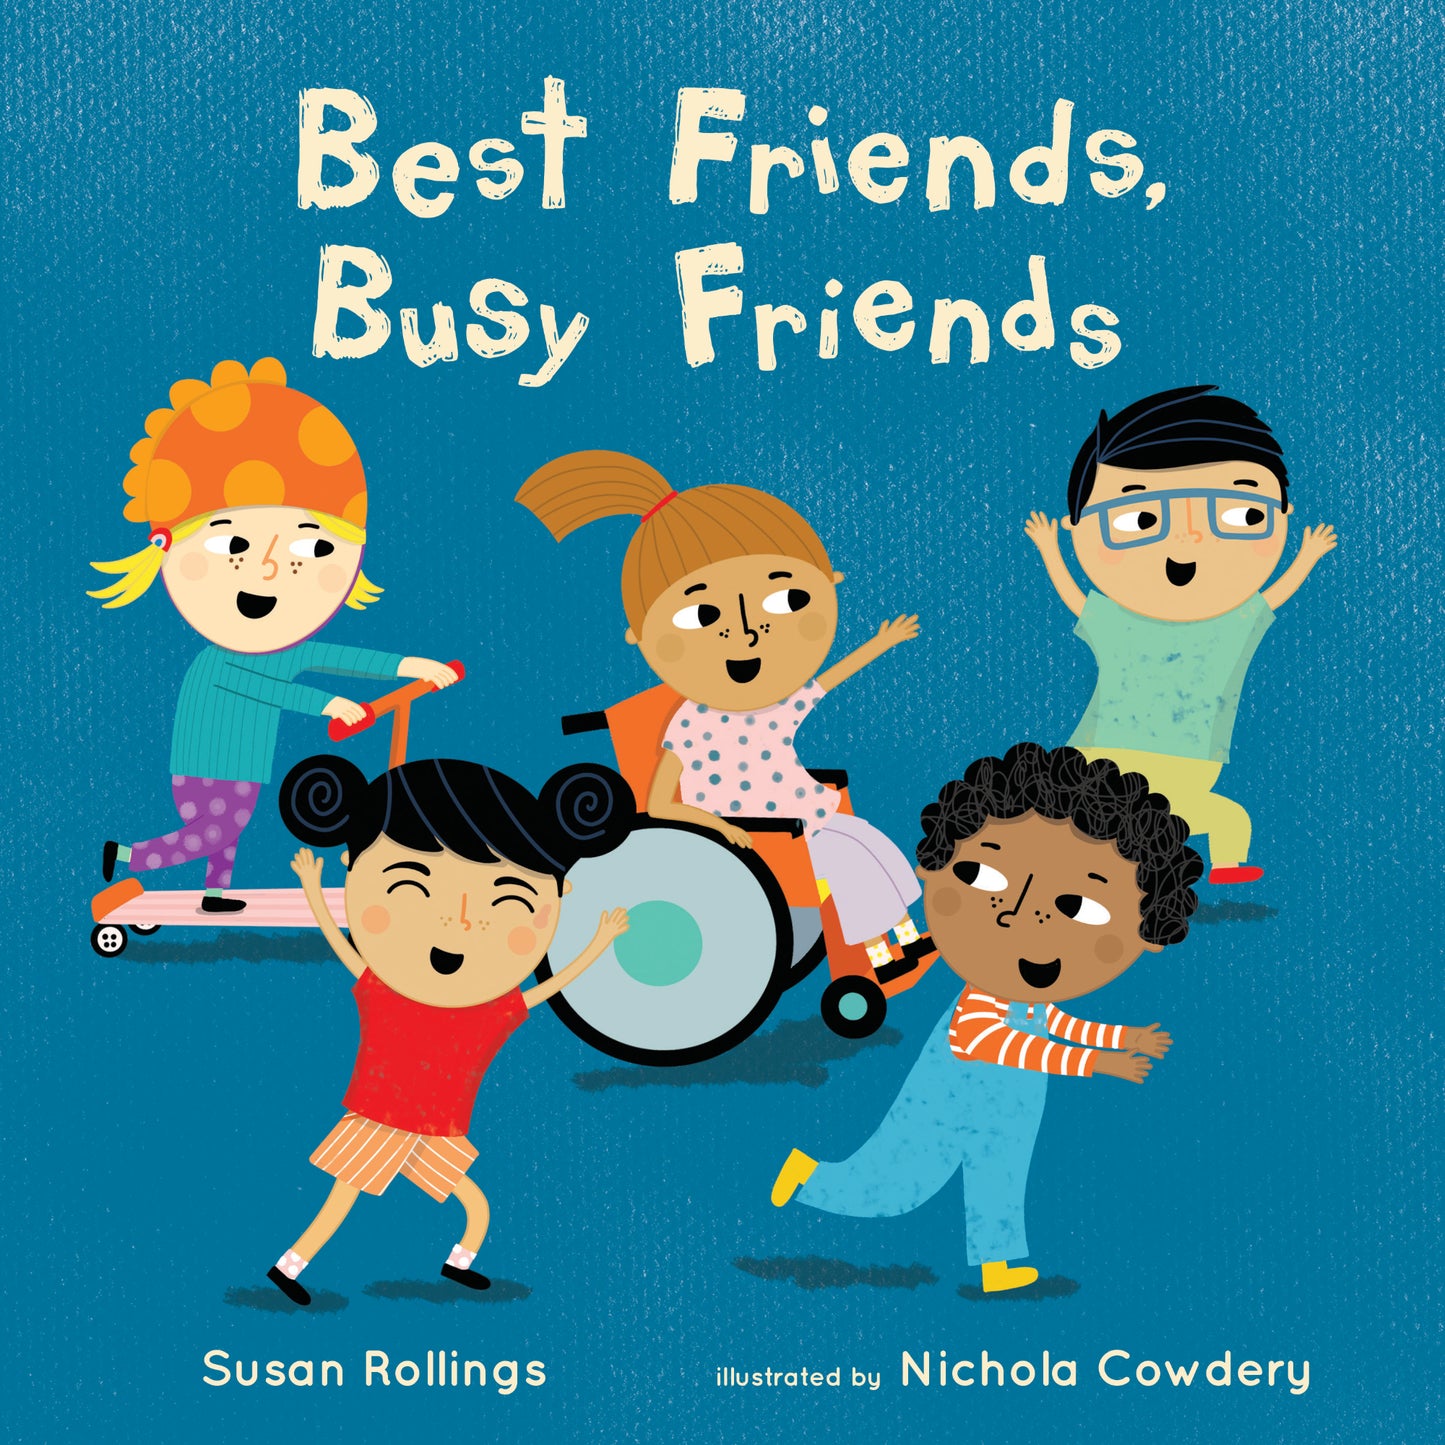 Best Friends, Busy Friends (Hardcover Edition)